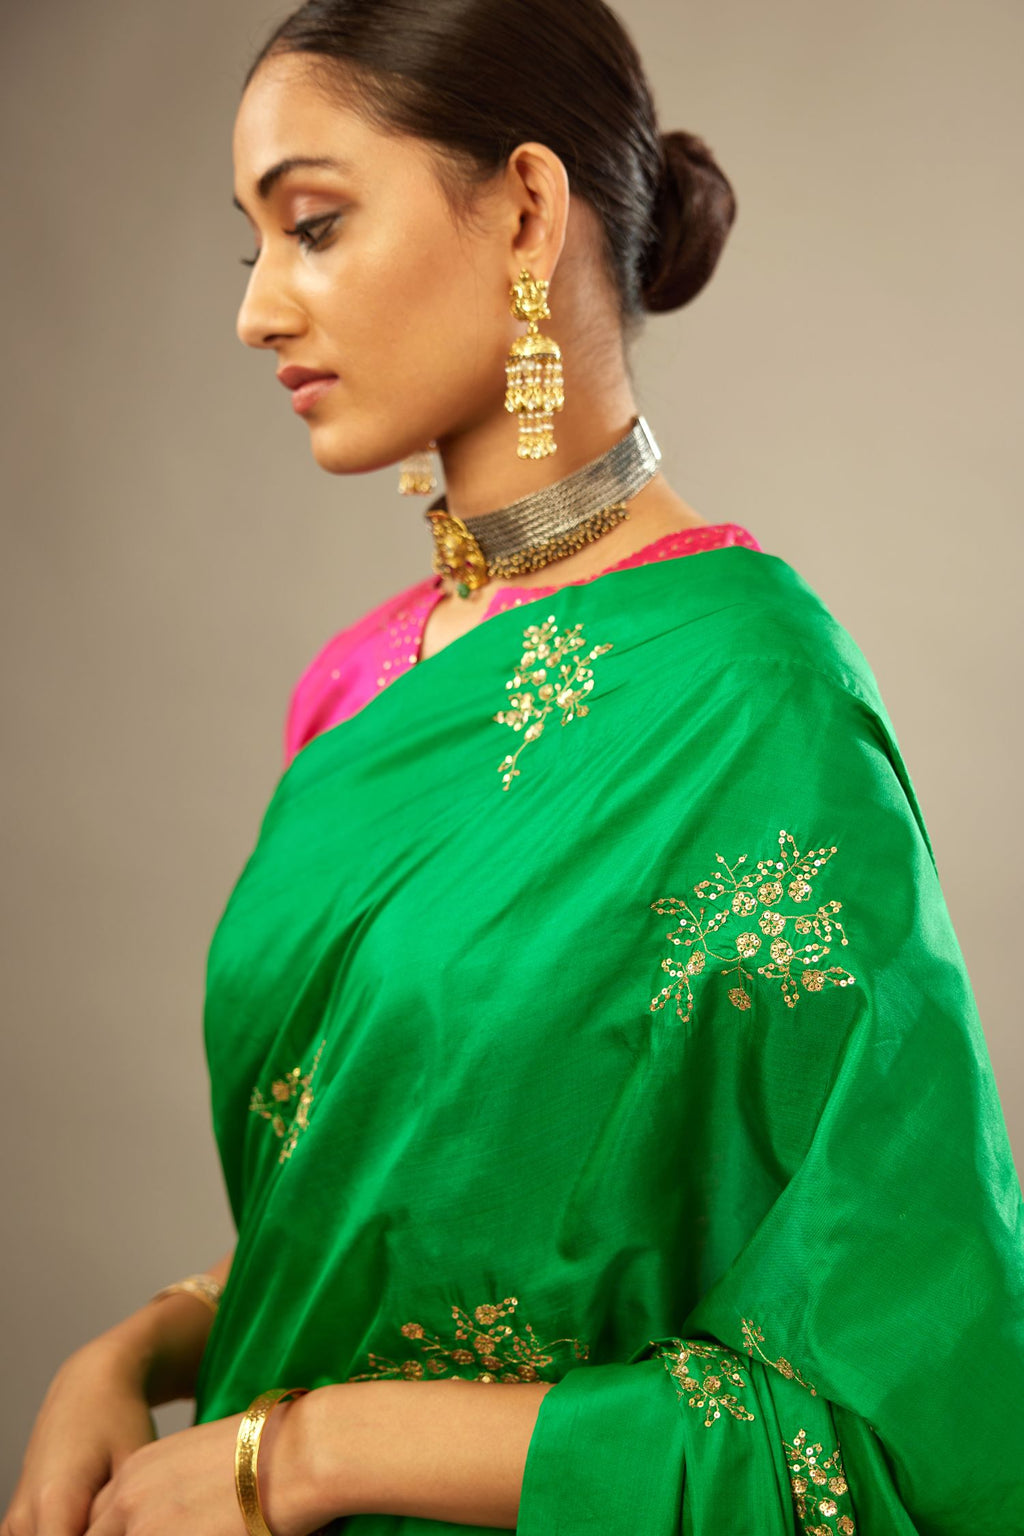 Grass green silk saree set with hand embroidered delicate sequins floral butas all over.